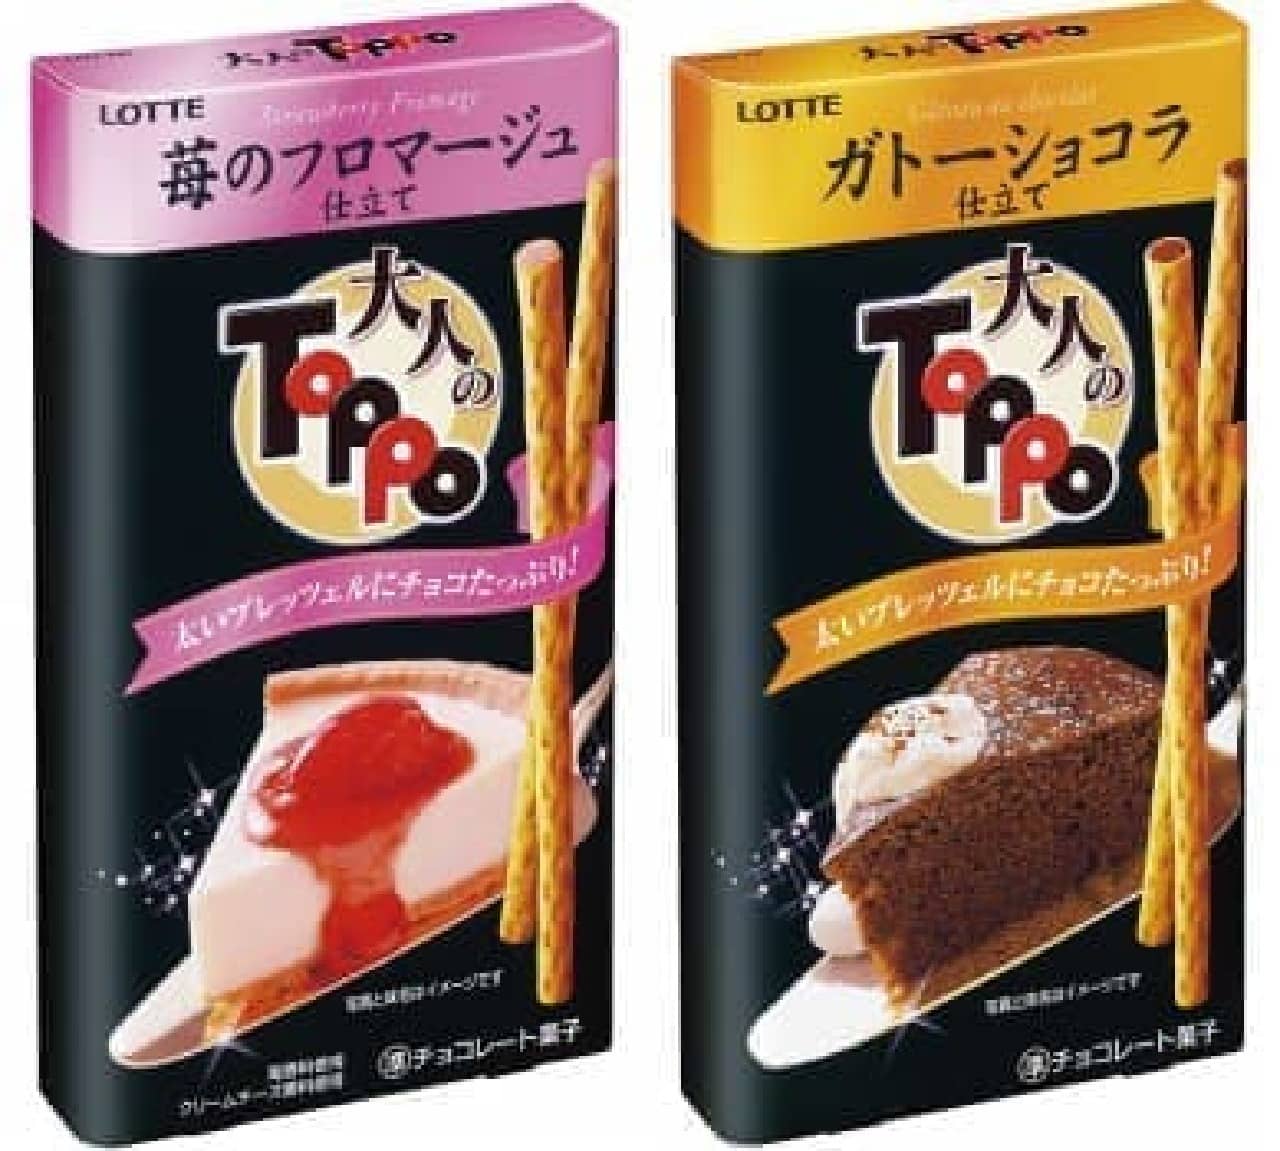 Adult Toppo "Strawberry Fromage Tailoring" and "Gateau Chocolate Tailoring"